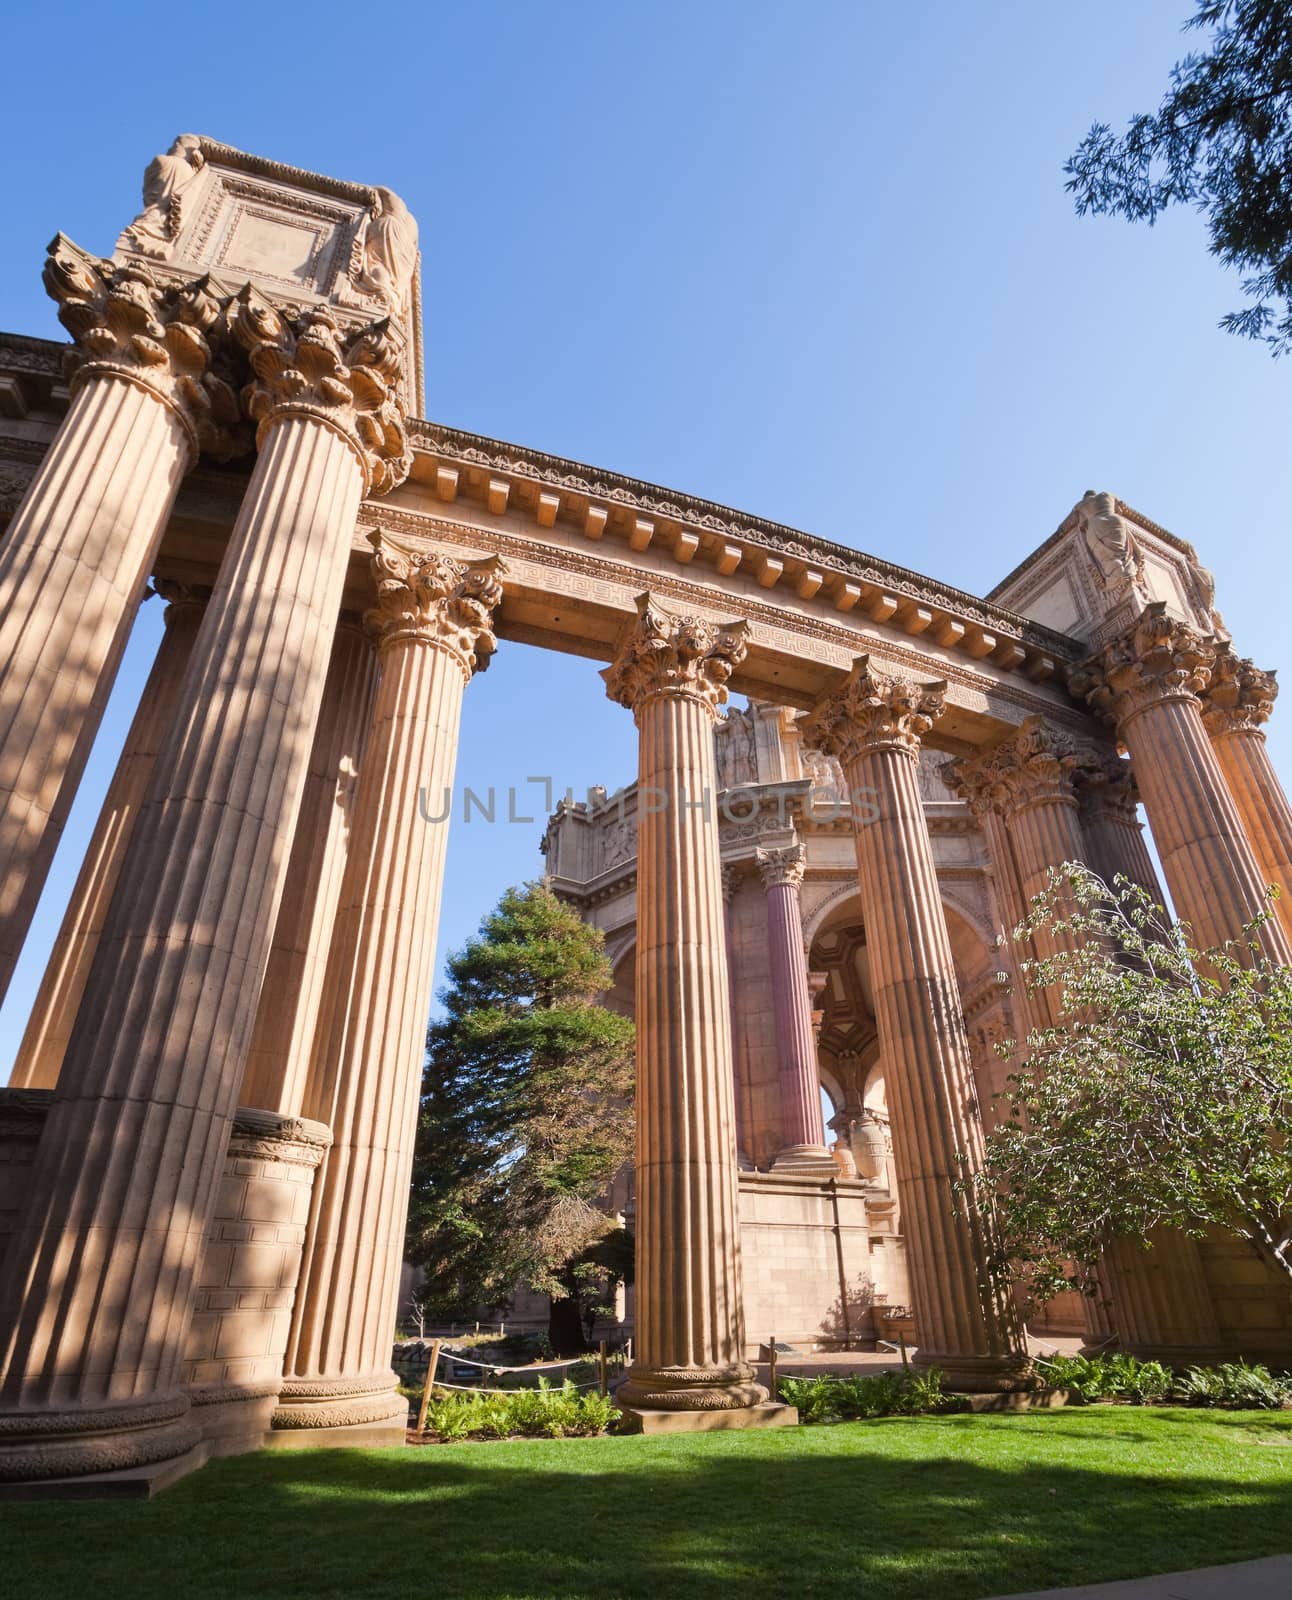 Palace of Fine Arts in San Francisco by hanusst